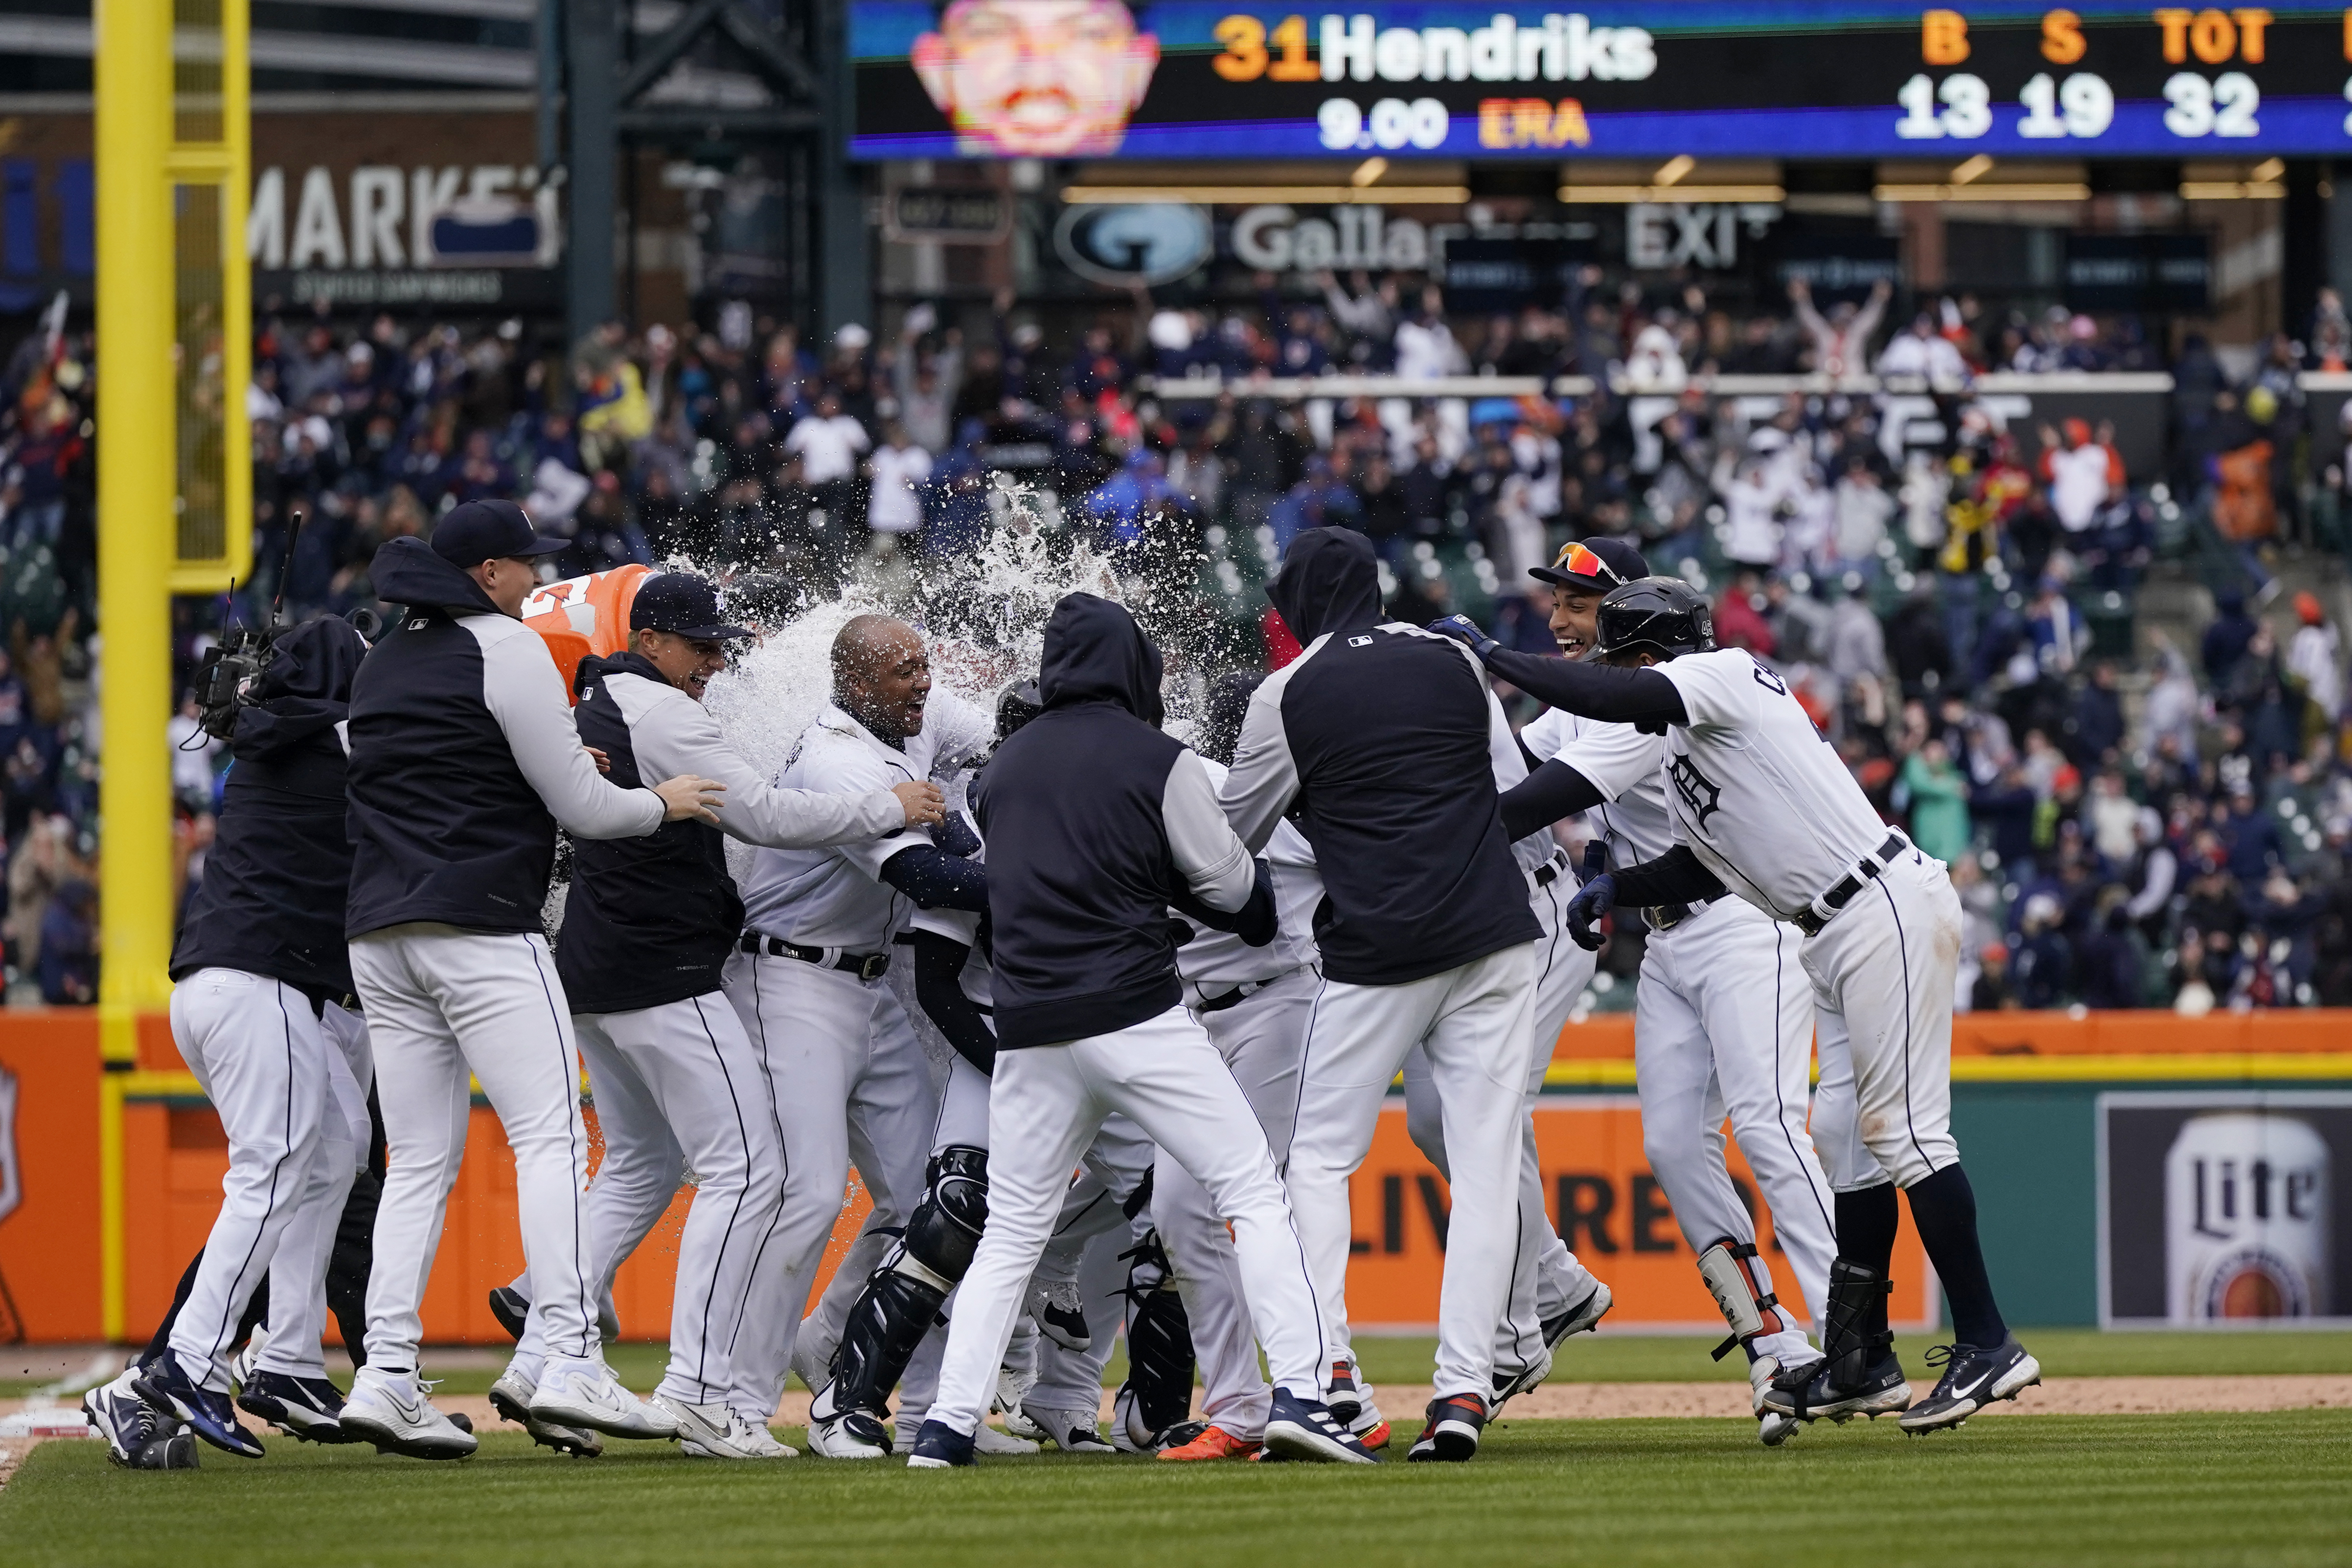 Javier Baez drives in game-winner as Tigers rally to beat White Sox in wild  9th inning 